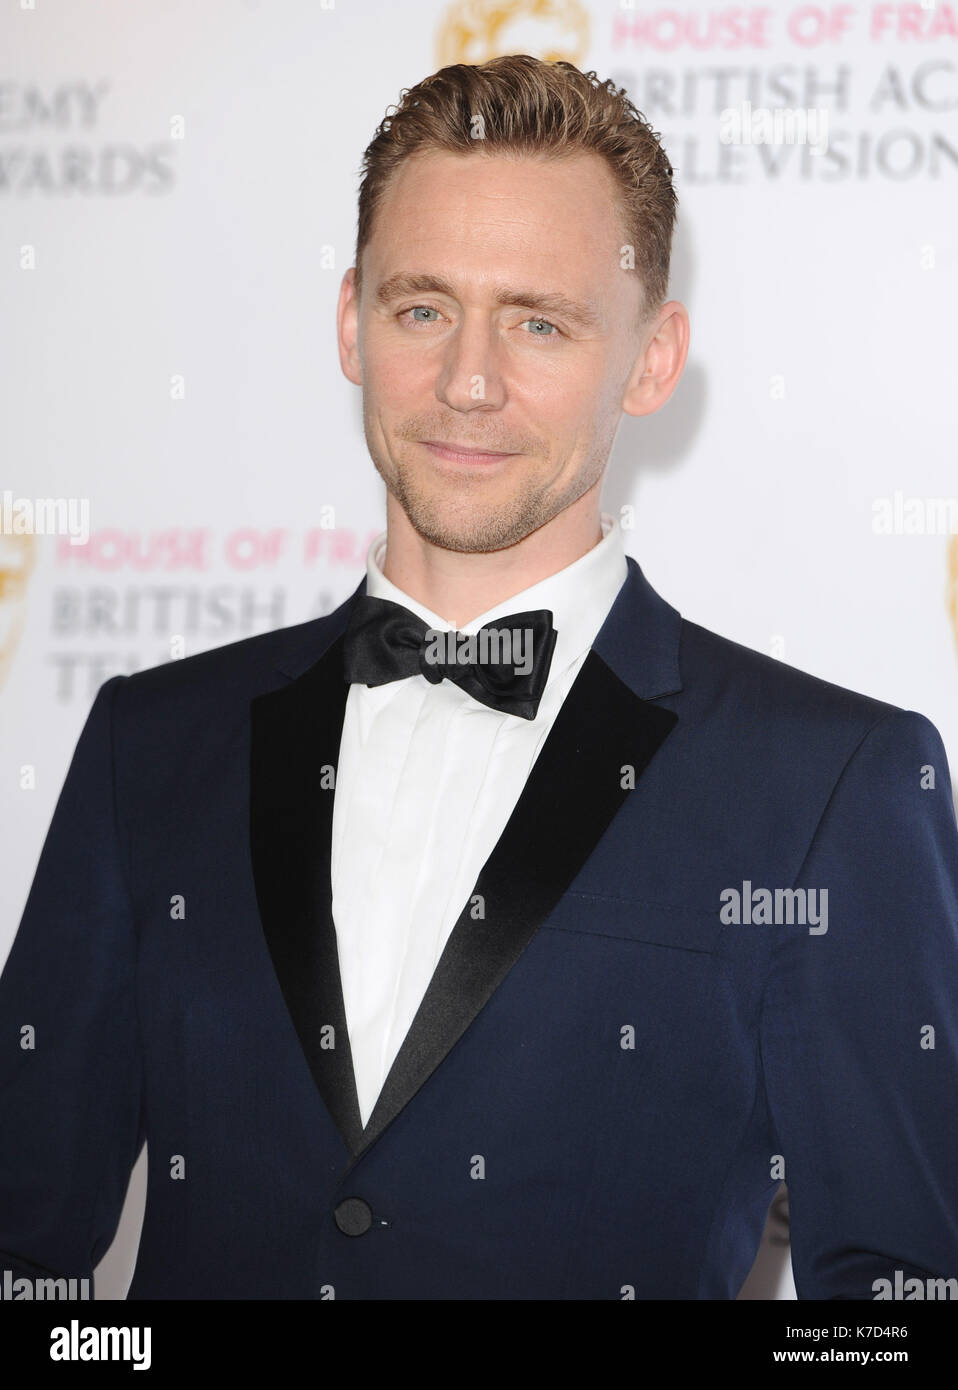 Photo Must Be Credited ©Kate Green/Alpha Press 079965 08/05/2016 Tom Hiddleston at the House of Fraser British Academy Television Awards Bafta Pressroom held at the Royal Festival Hall in London Stock Photo